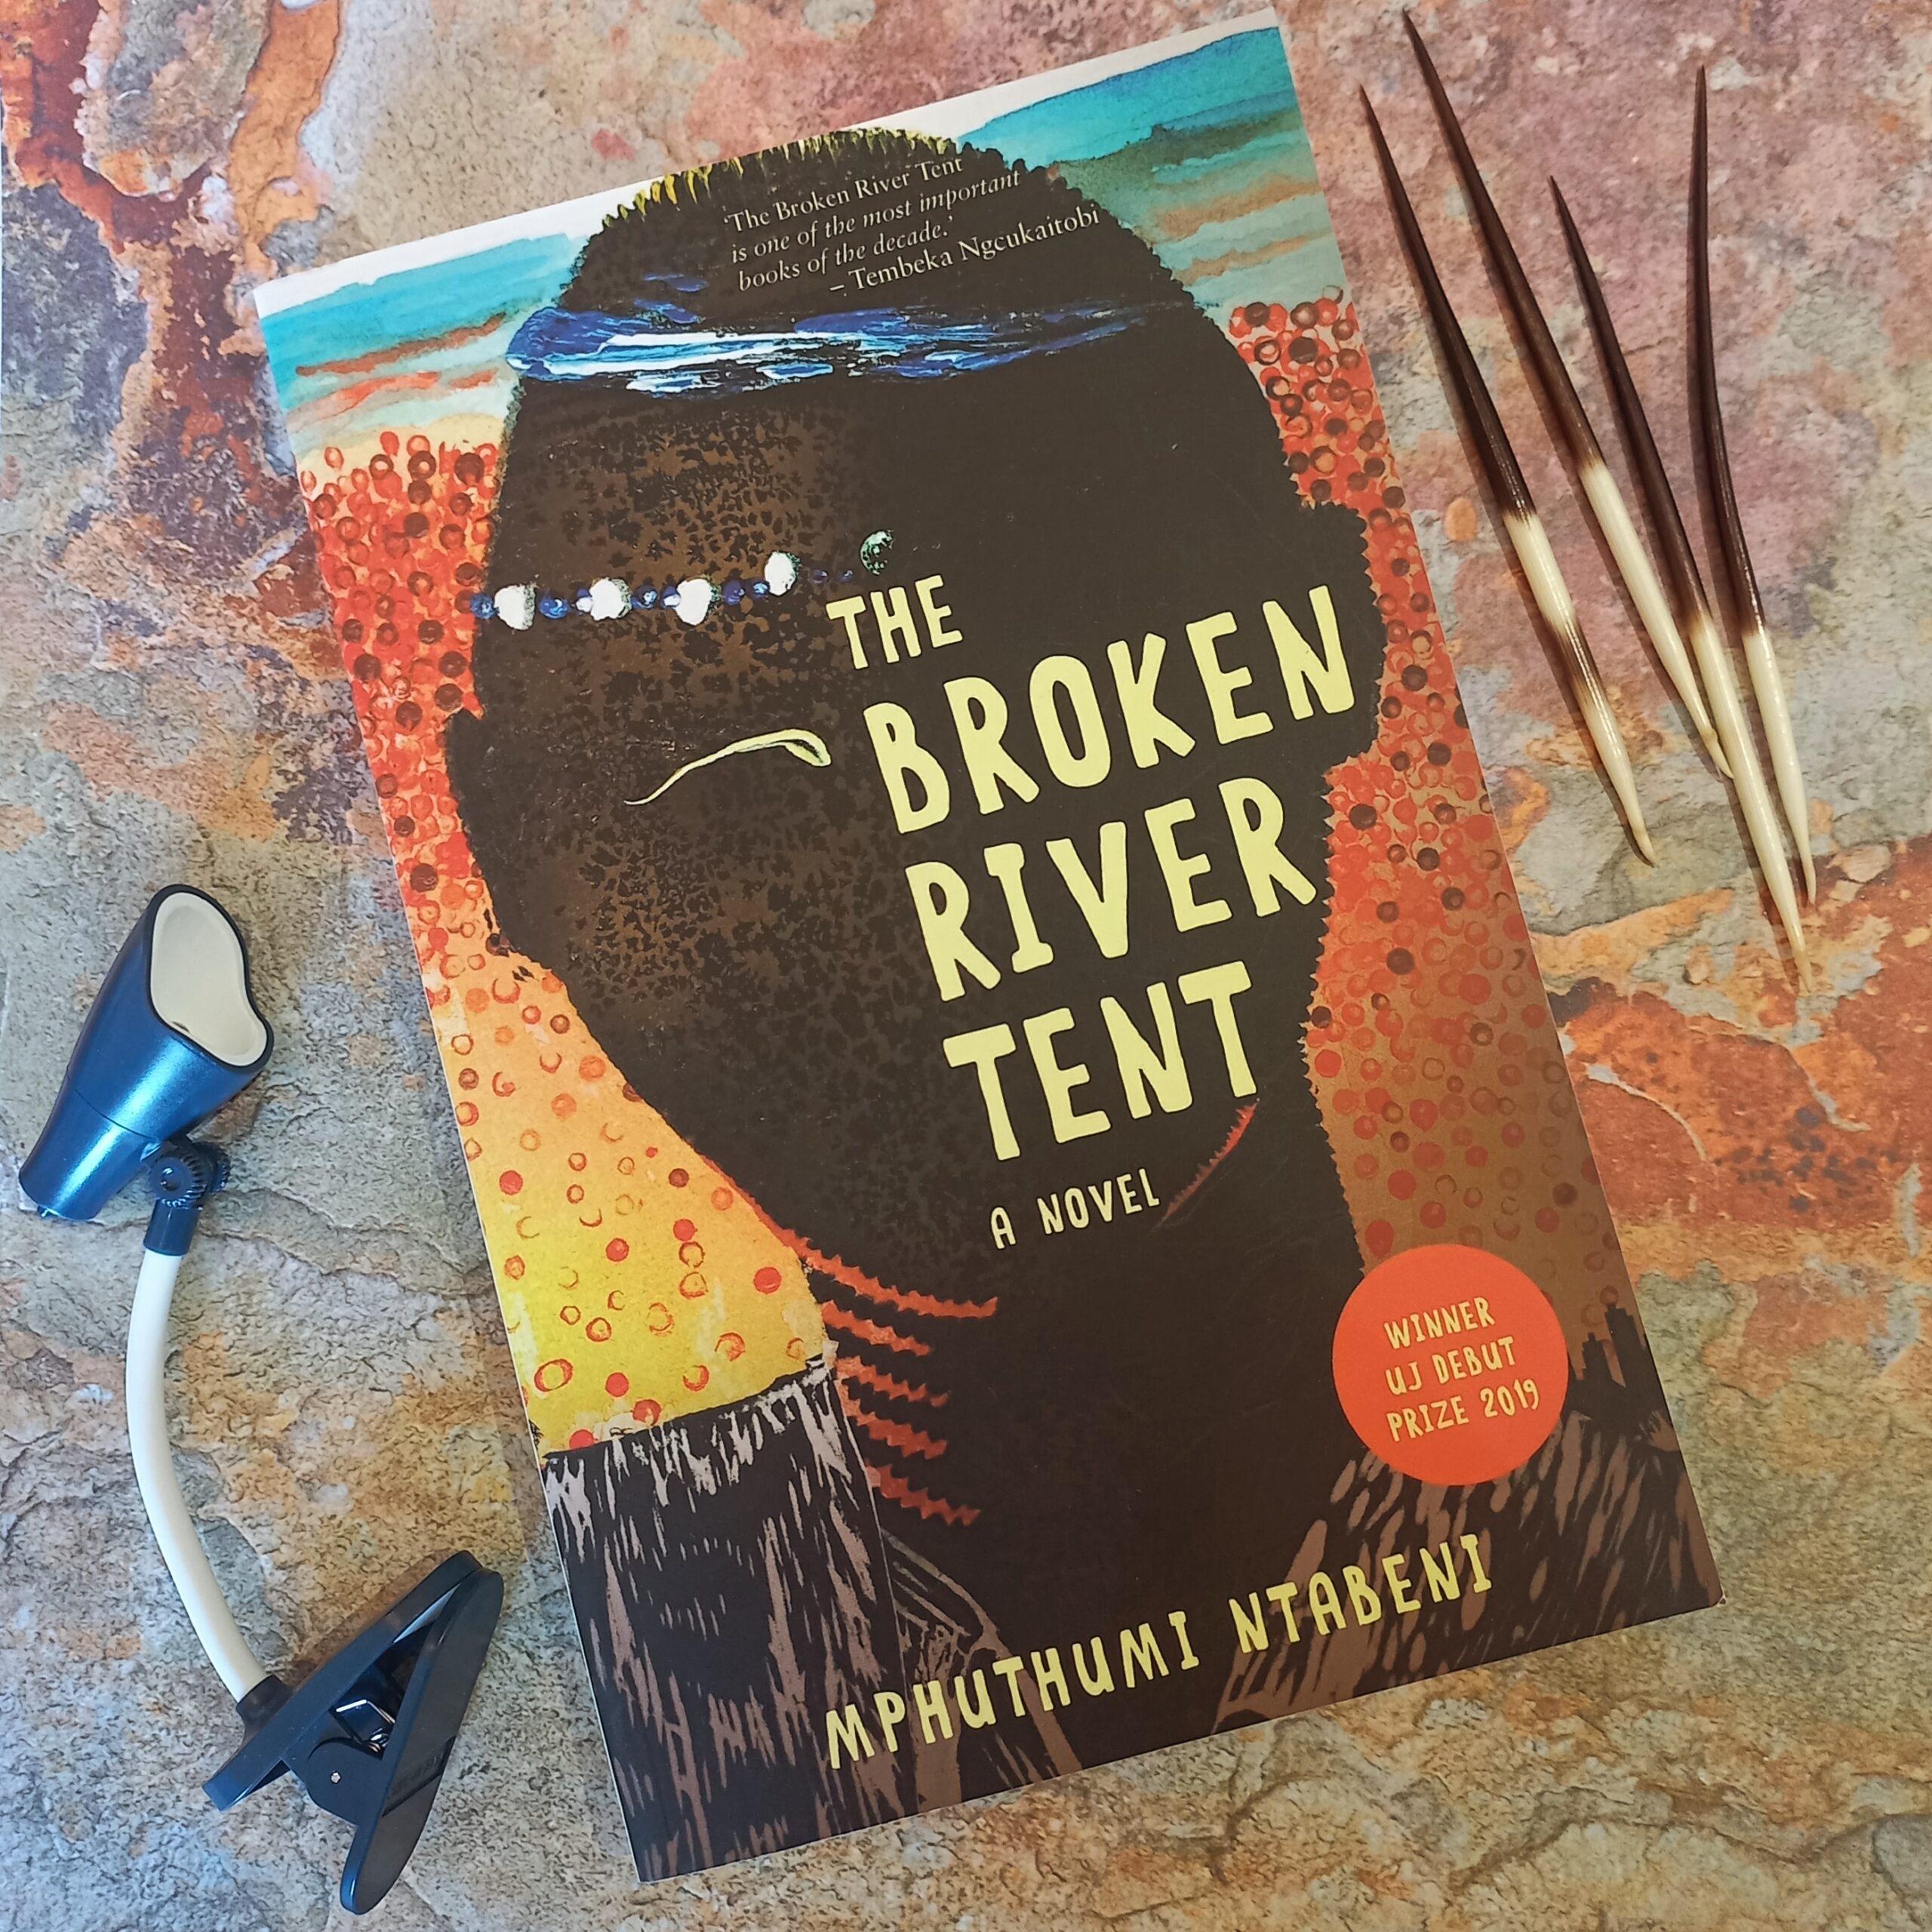 Unraveling Histories and Identities: A Brief Overview of ‘The Broken River Tent’ by Mphutumi Ntabeni